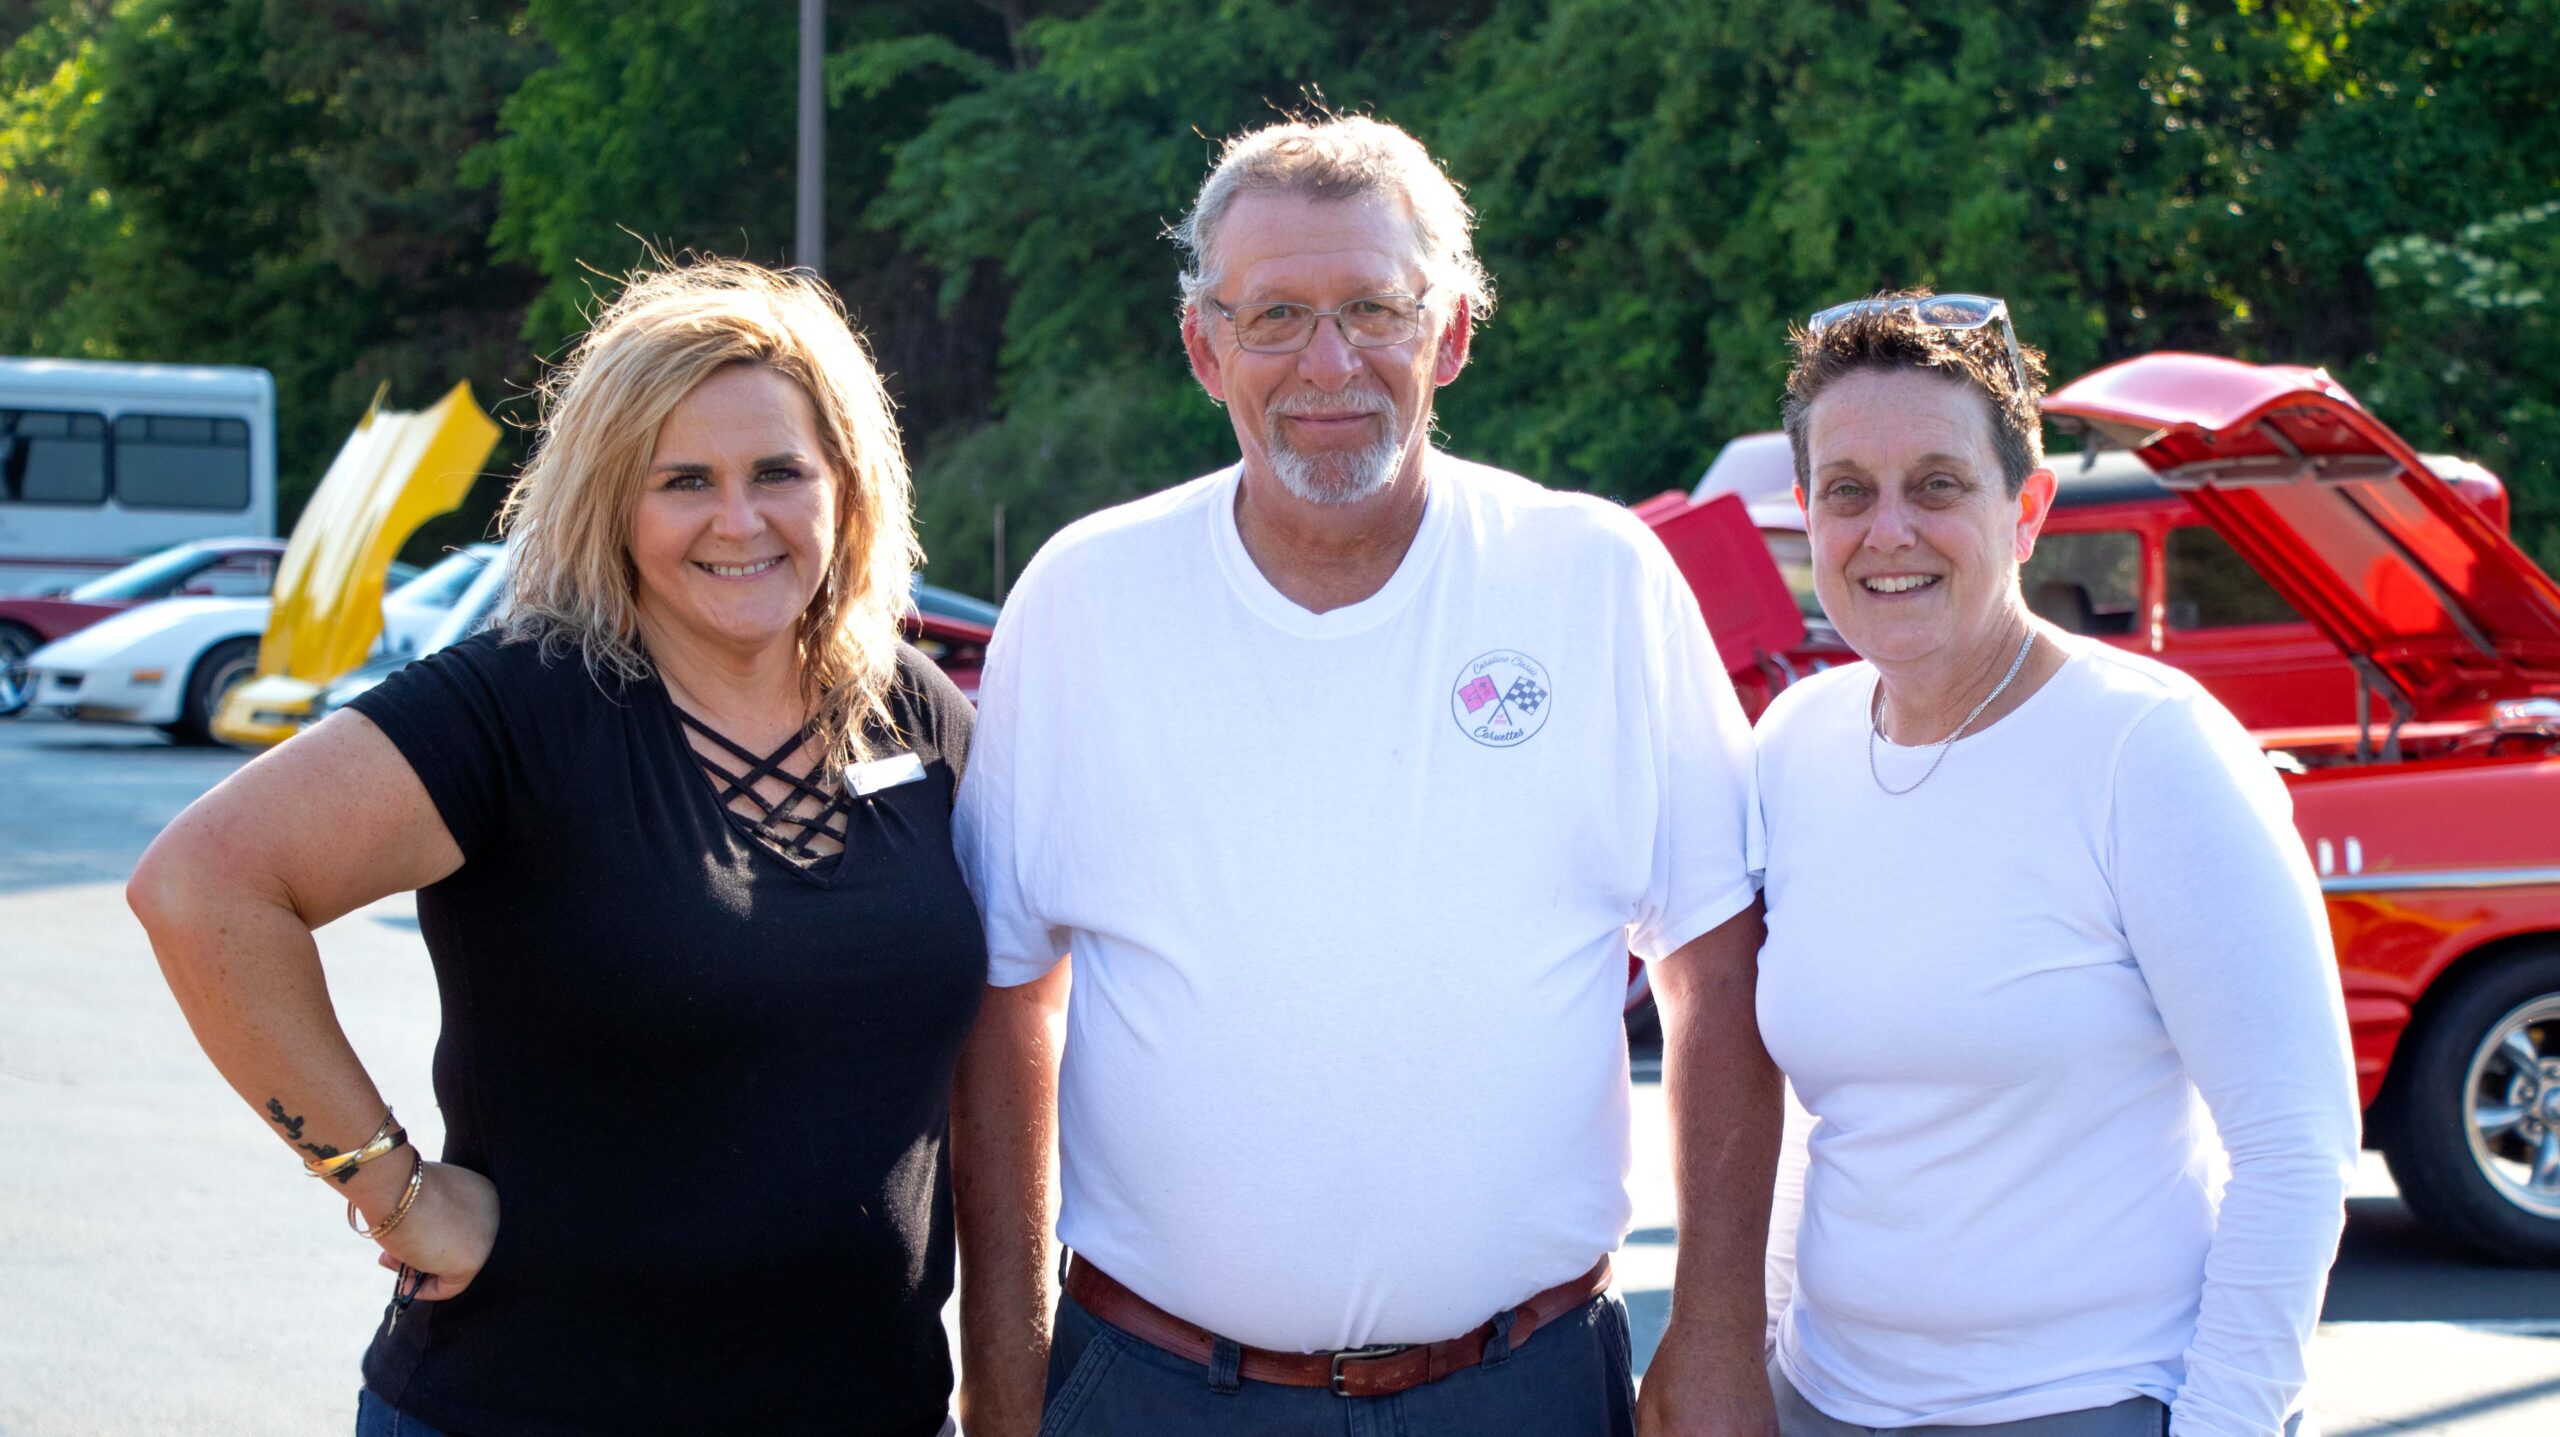 It took the combined efforts of the Wexford House’s Community Relations Director Jodie Lankford, Carolina Classic Corvettes President Steve Madurski and Wexford House’s Executive Director Leslie Burleson to make Friday’s cruise in car show a reality. Photo provided by Wexford House Assisted Living